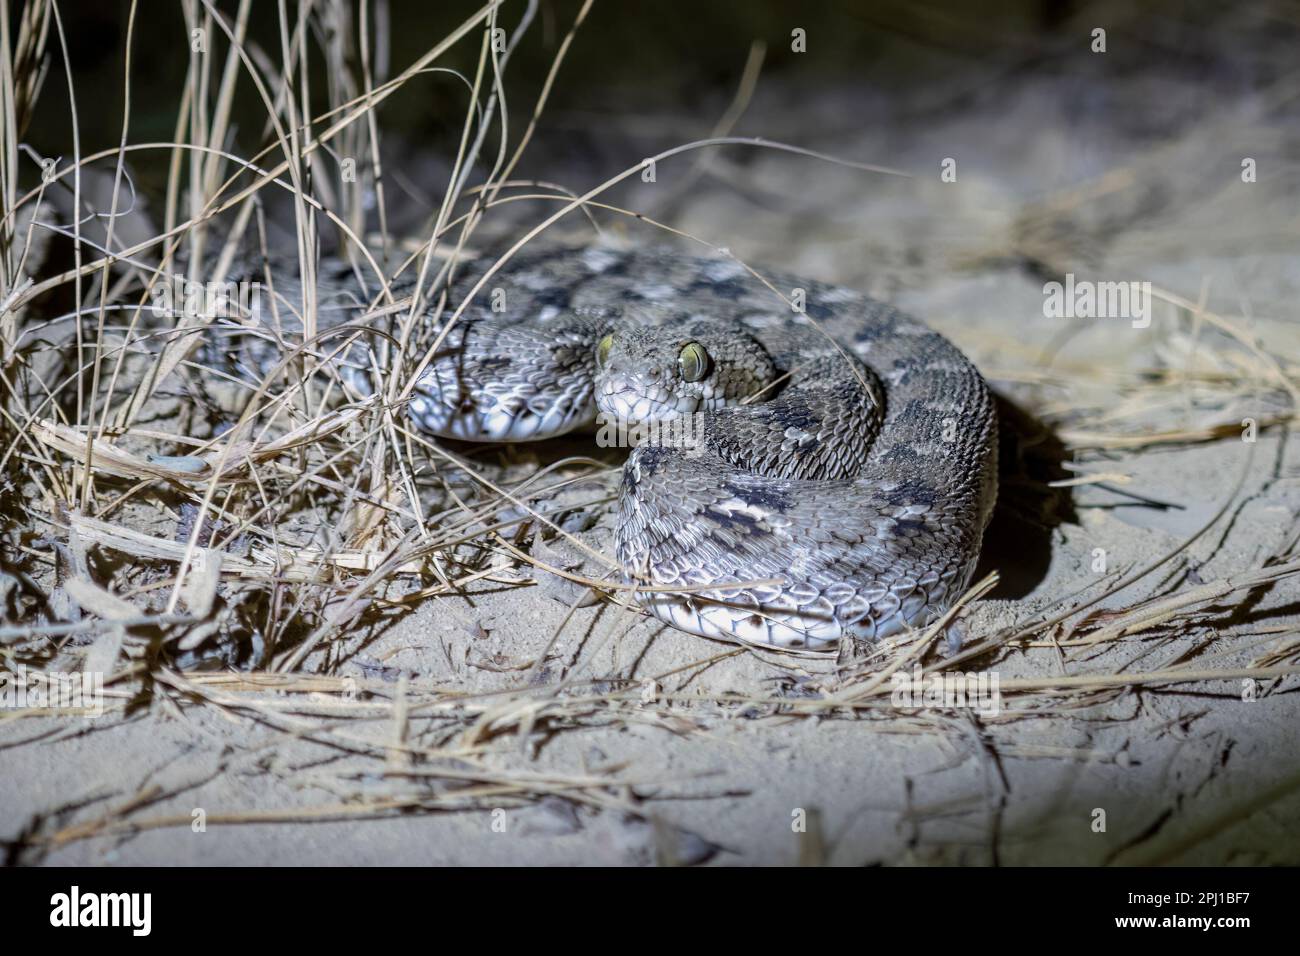 Echis carinatus, Indian saw-scaled viper, little Indian viper or saw-scaled viper, a venomous snake, observed in Greater Rann of Kutch Stock Photo